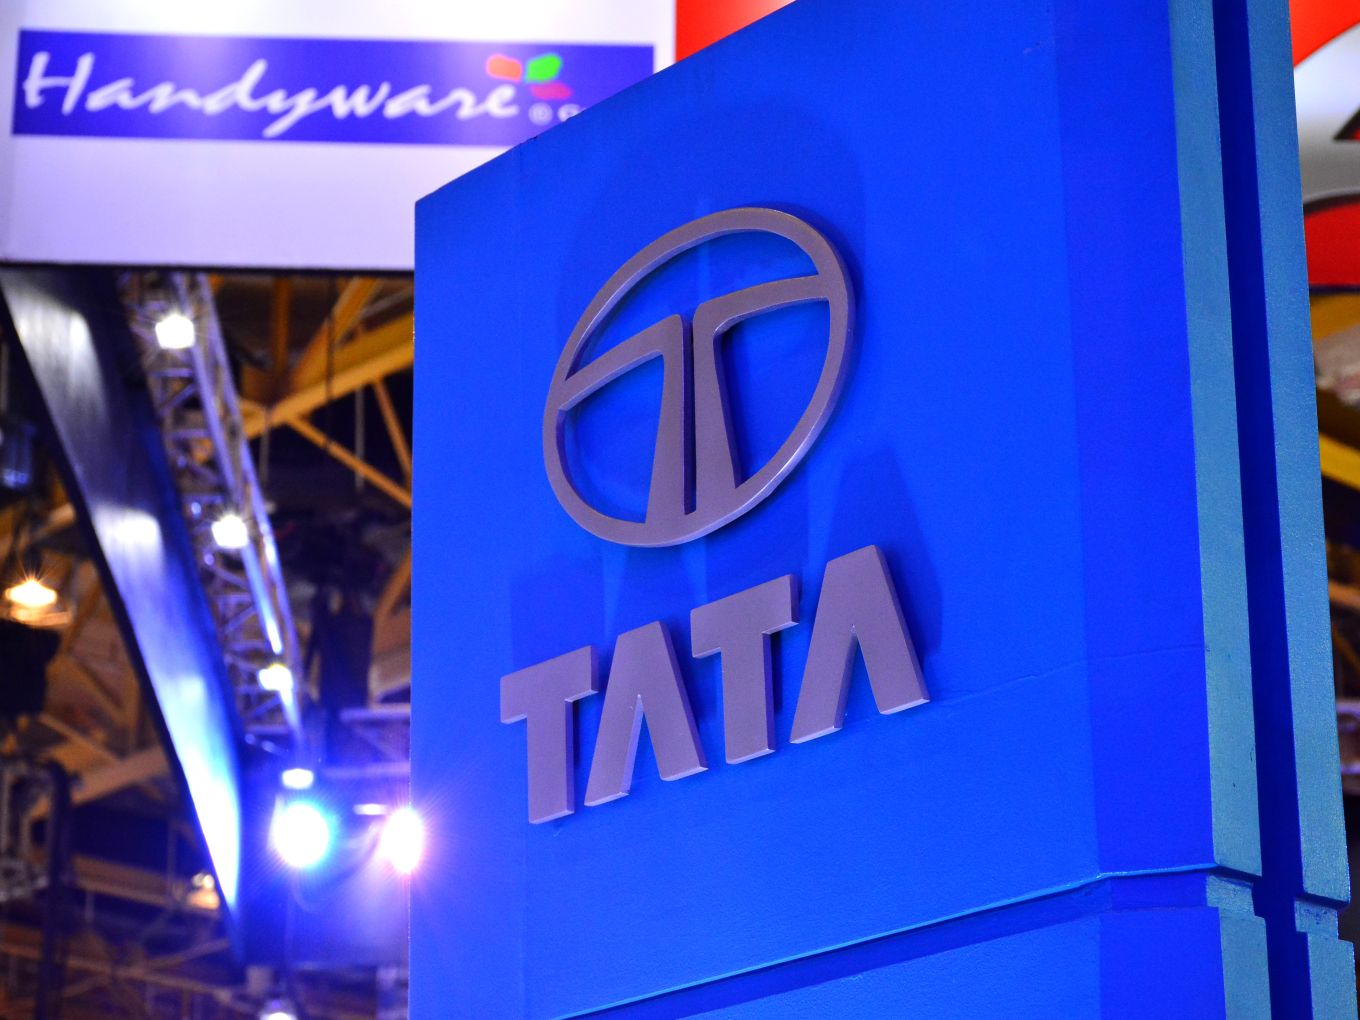 Tata Motors Launches First-Ever Electric Truck To Widen EV Focus